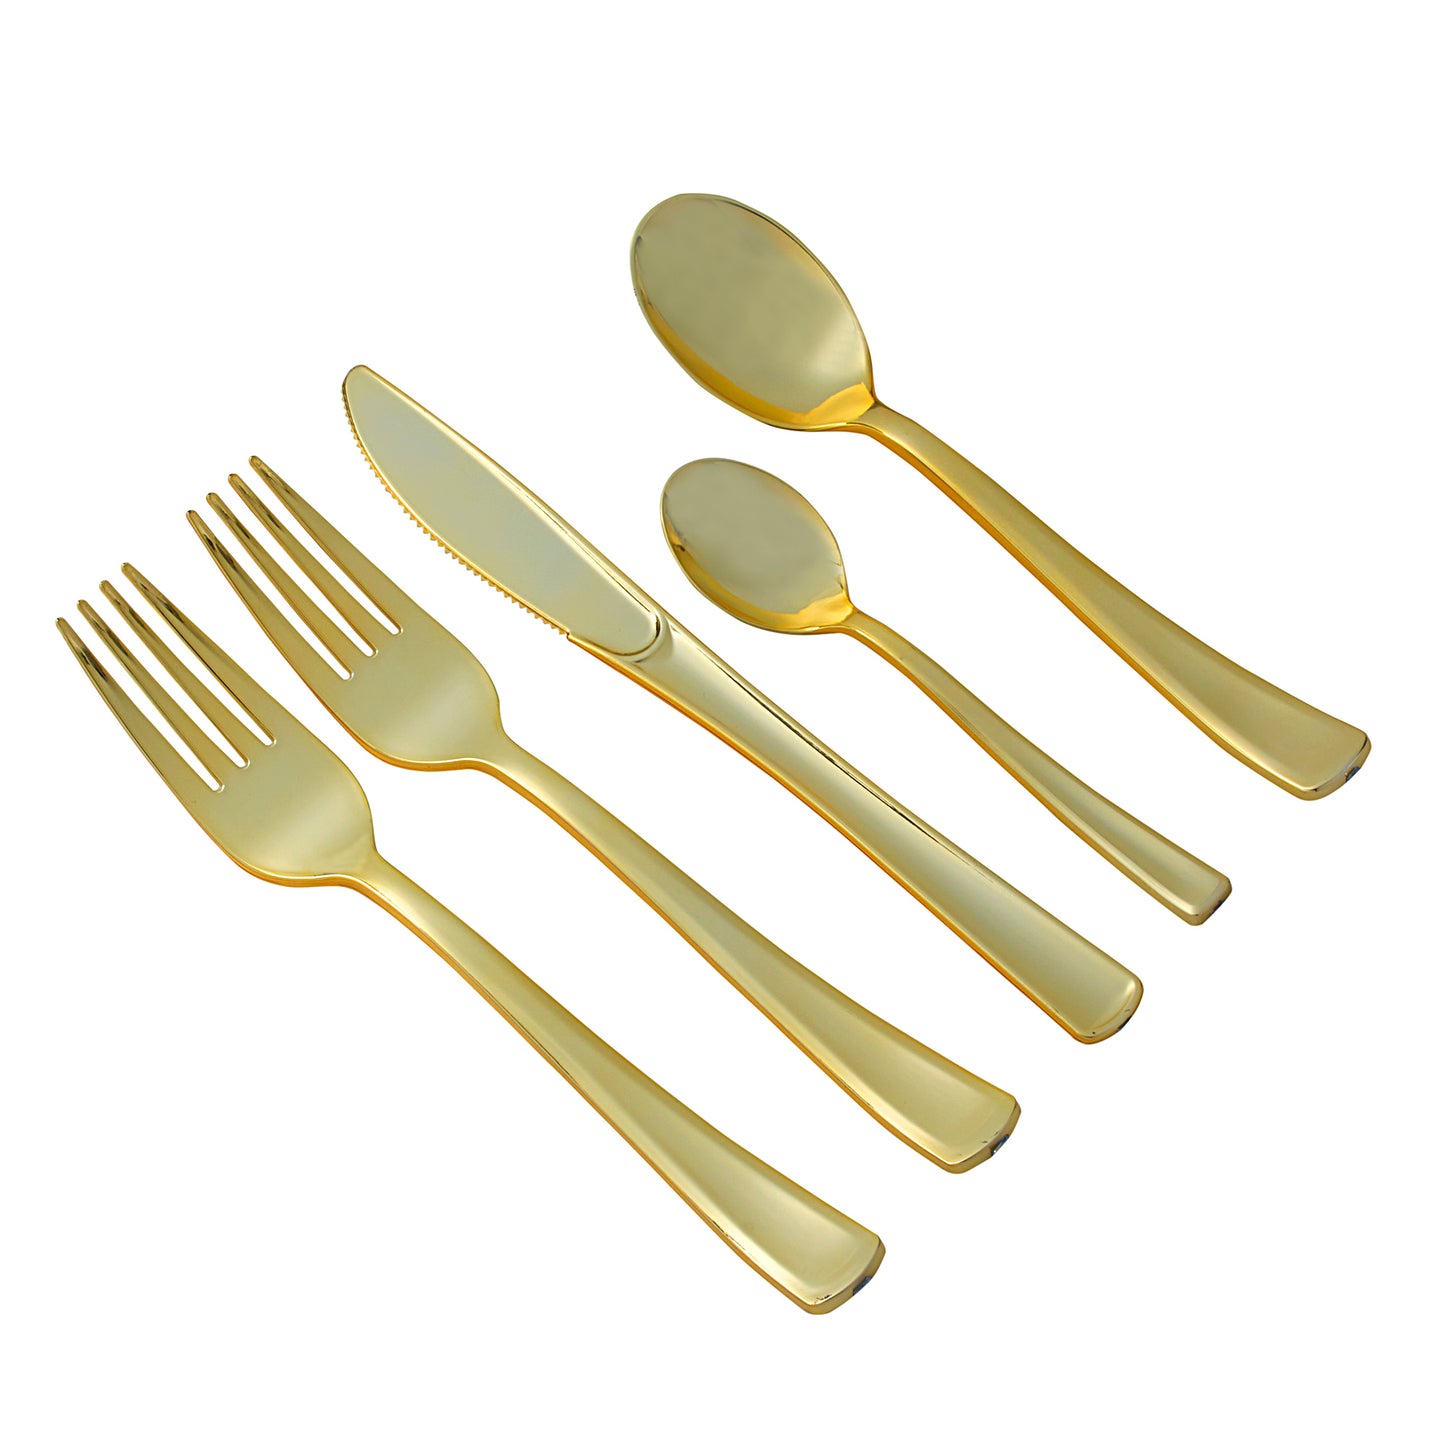 250 piece gold plastic silverware set for 50 guests: 100 forks, 50 knives, 50 spoons, 50 mini spoons